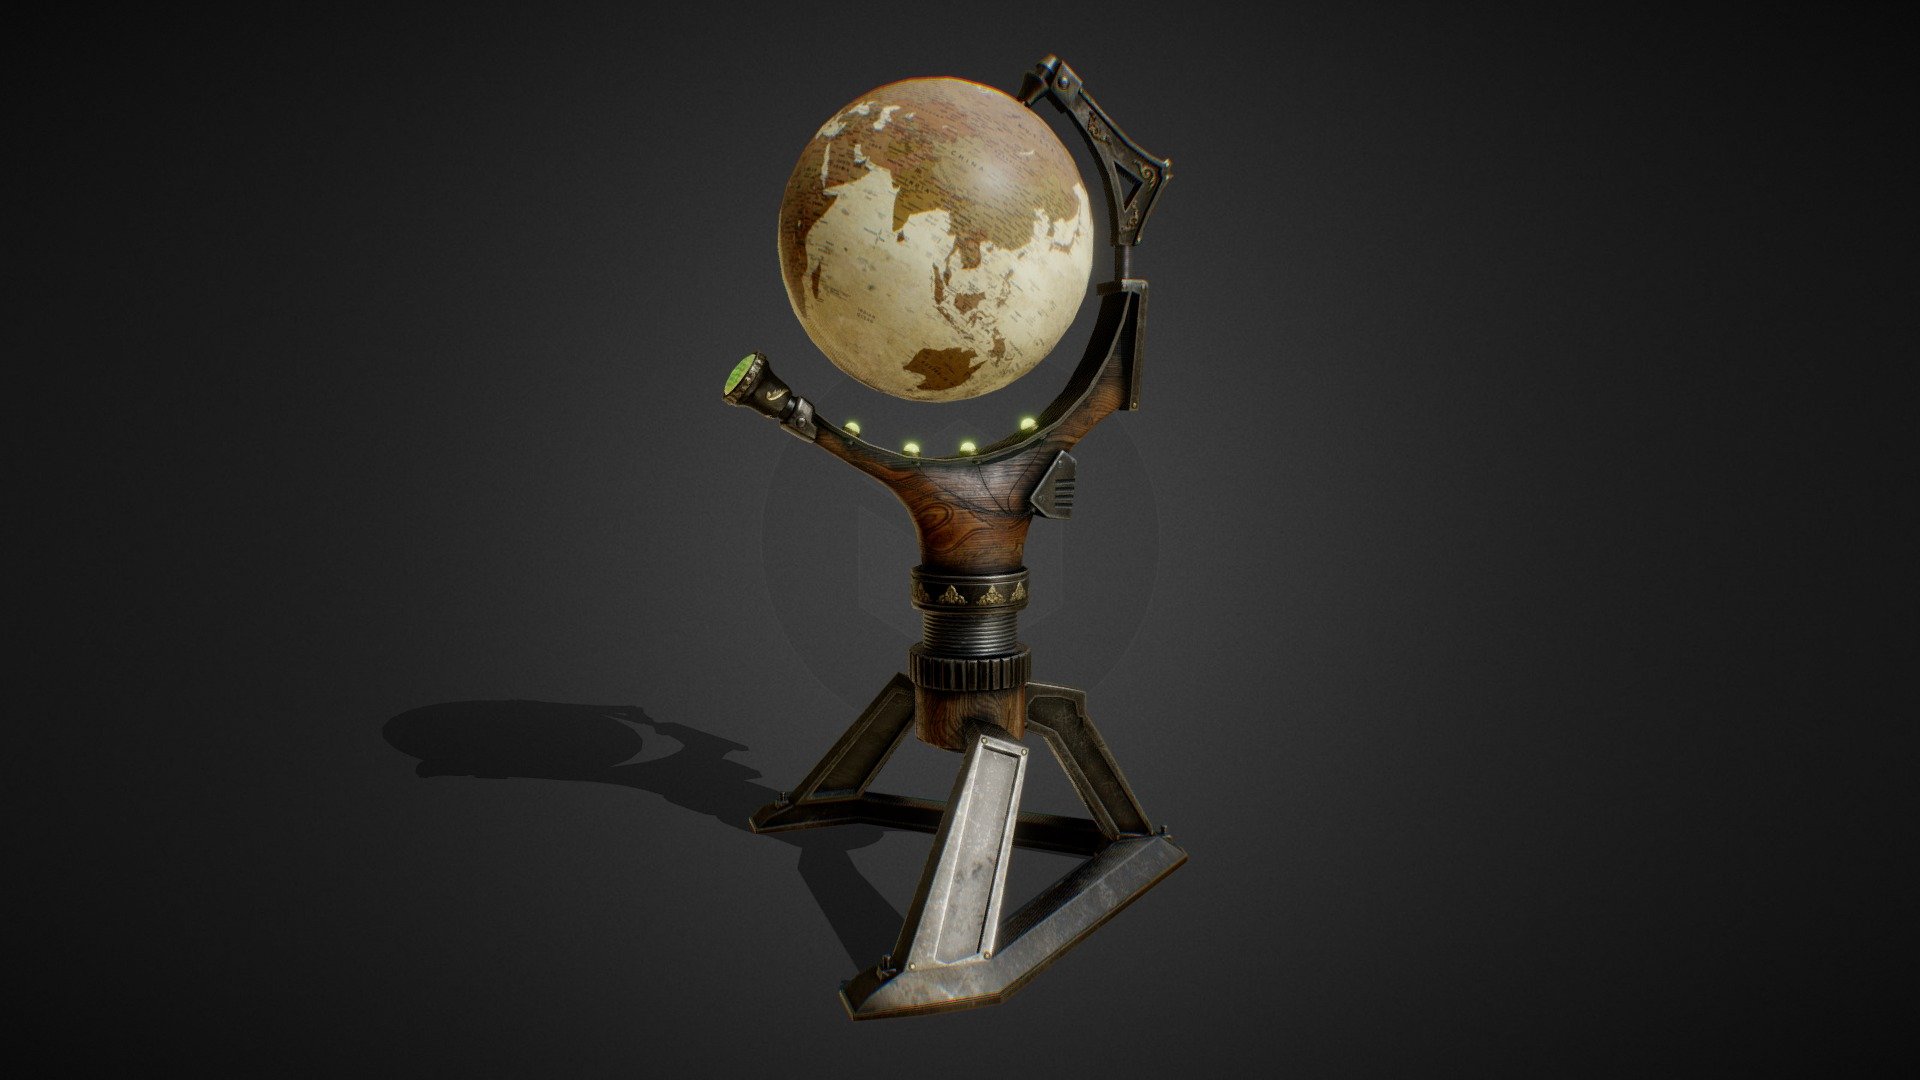 Here is a Steampunk globe that I realised as a test to enter at Delusion studio.
Made in aproximatlly 15 hours with blender and textured in substance painter 3d model